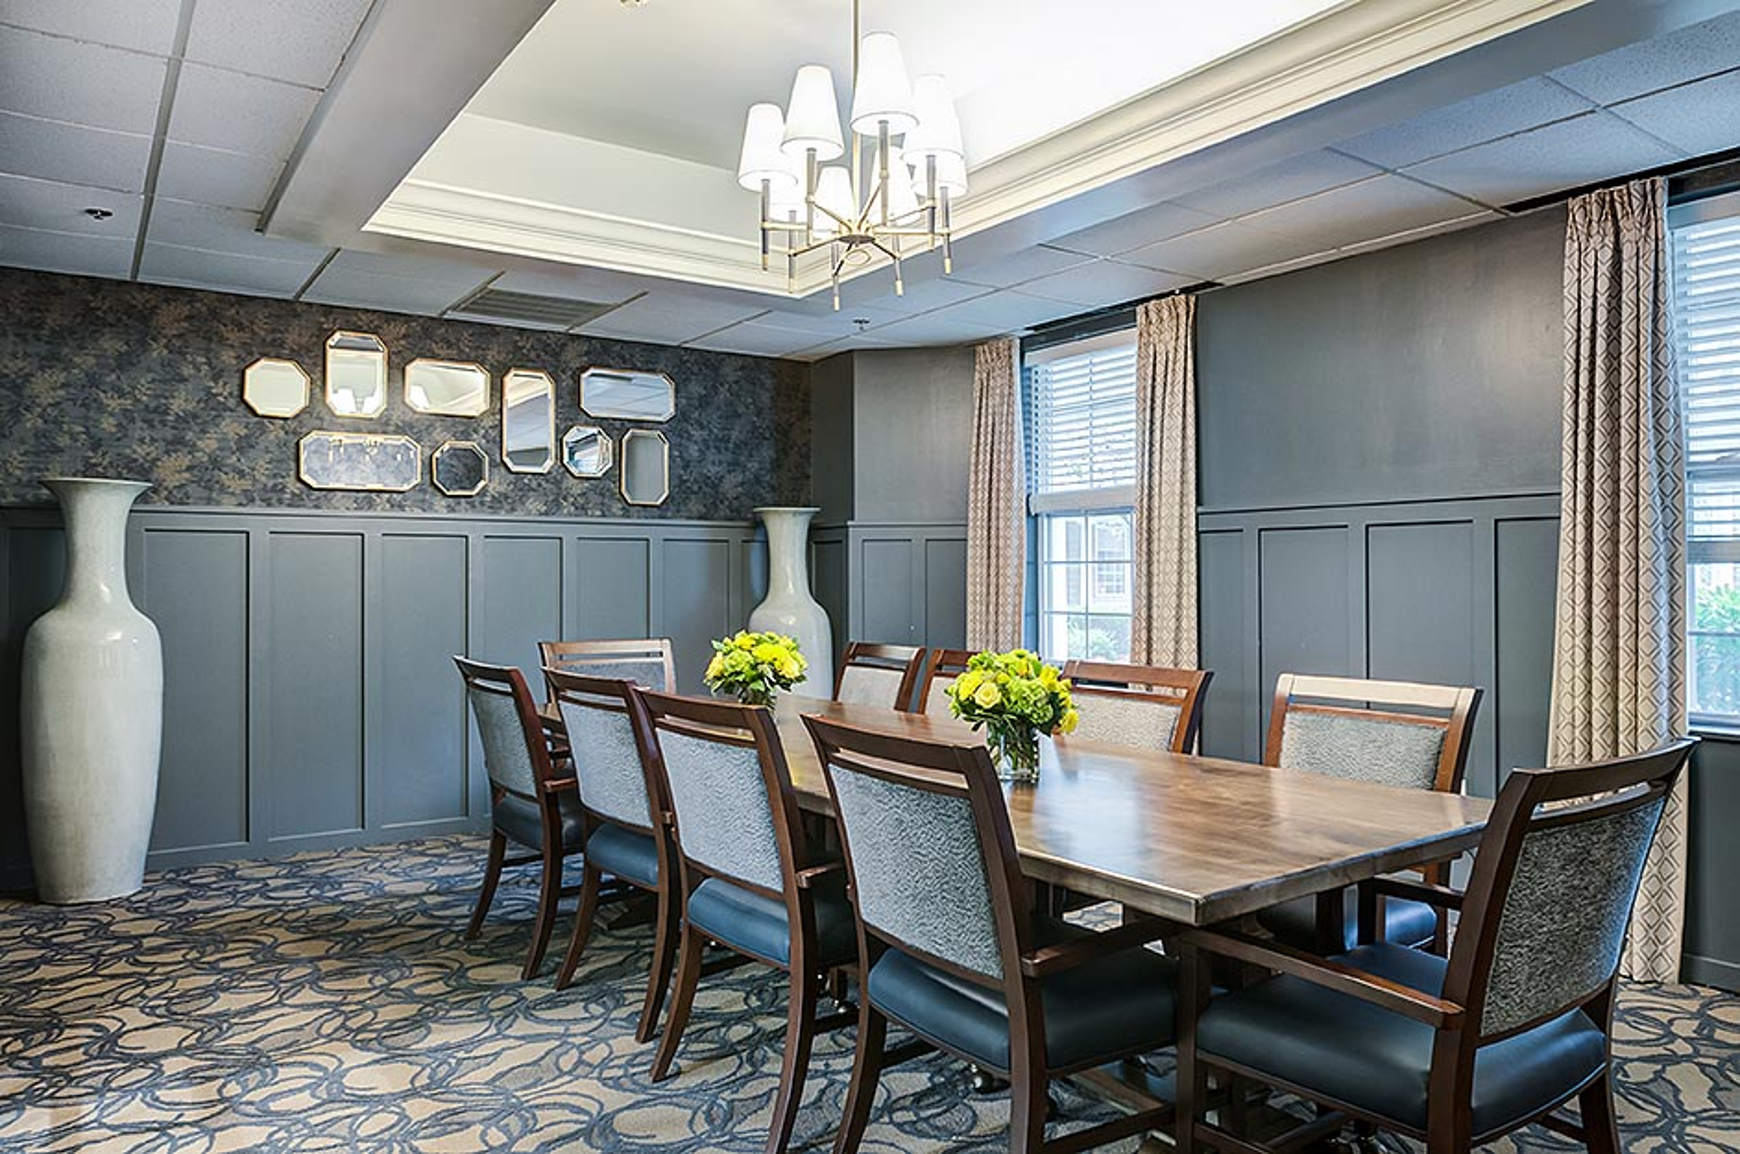 Private dining room with long table and chairs and wainscoting wall treatment